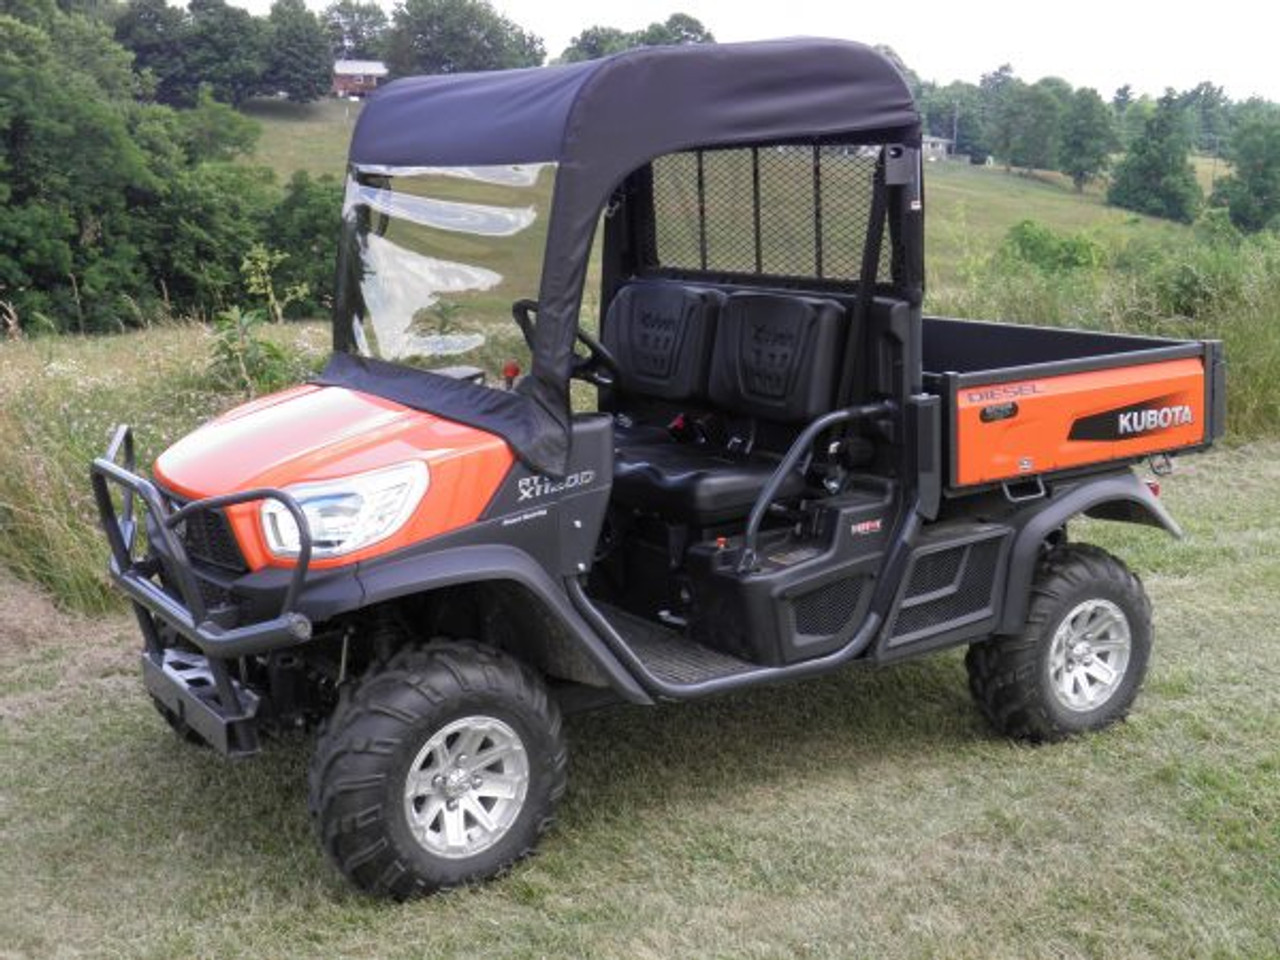 3 Star side x side Kubota RTV XG850 vinyl windshield top and rear window front and side angle view